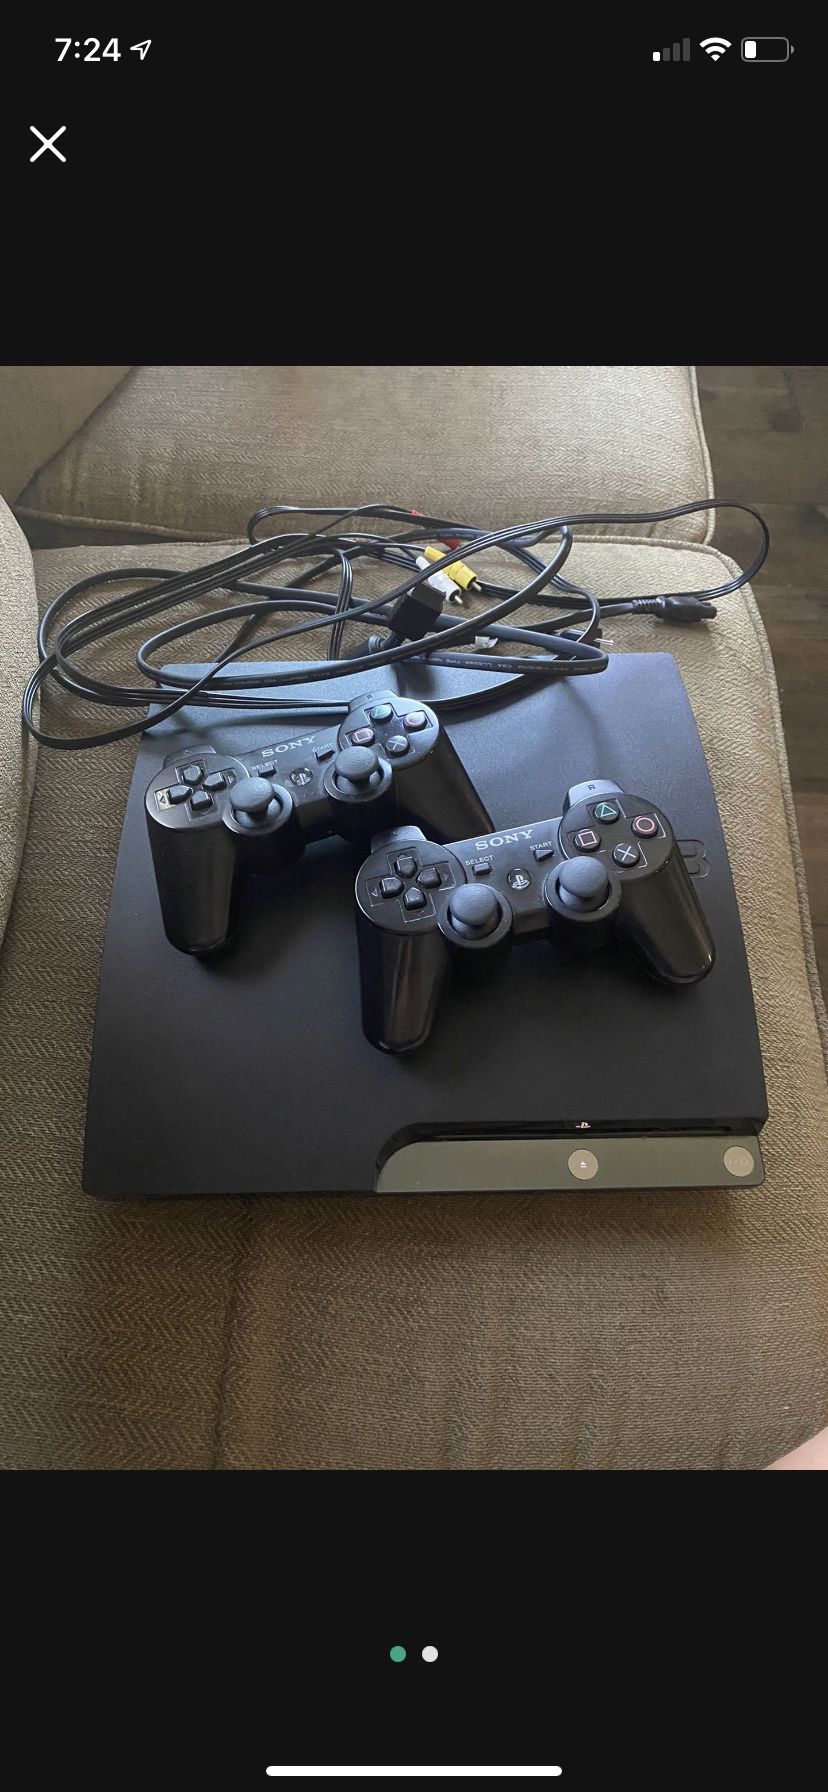 Sony PS3 Console, Games, and Controllers